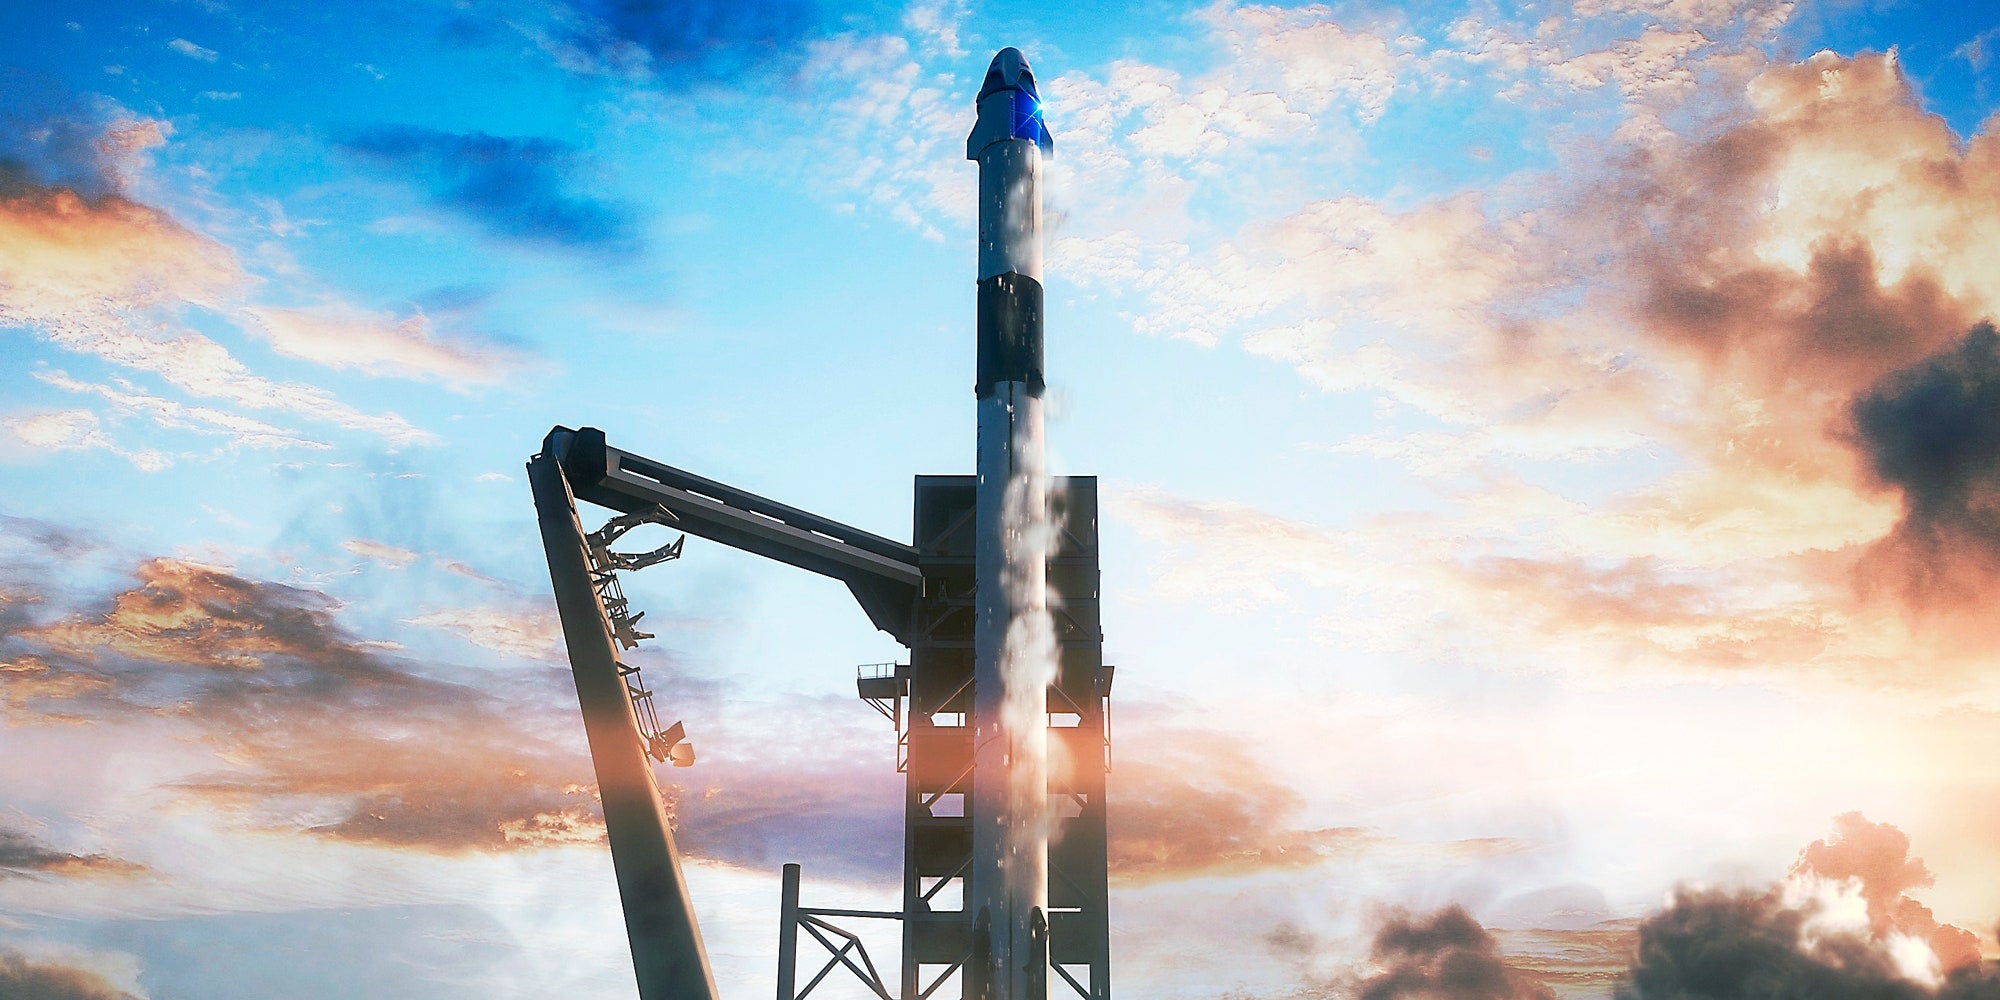 NASA announces Astronauts that will launch on SpaceX's Third Crewed Mission!